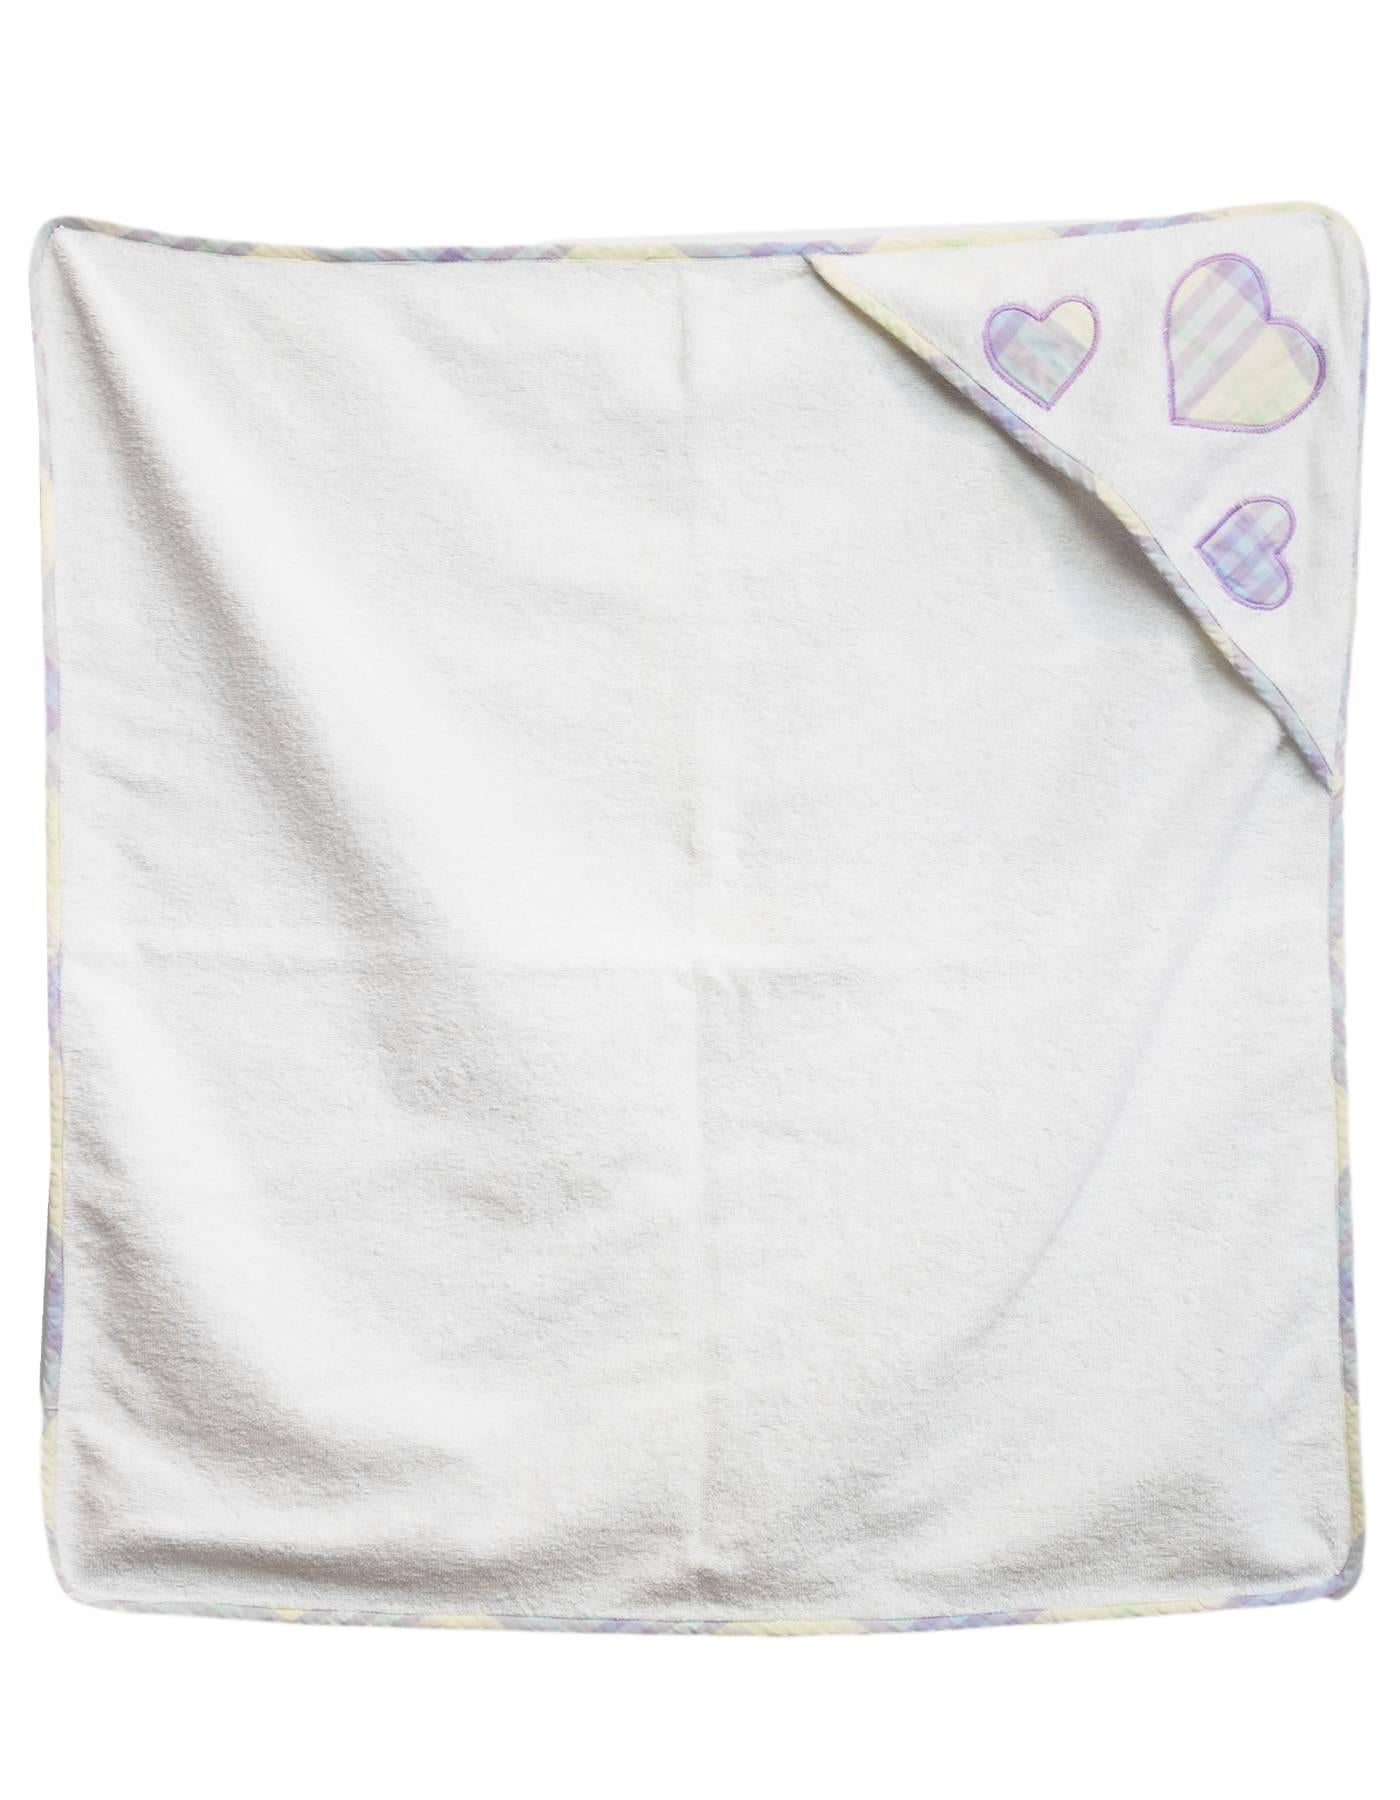 Burberry Purple Plaid Infant Towel Set
Infant hooded towel with holder/pouch. Features plaid trim and hearts.

Color: White, purple
Composition: Not listed, feels like cotton
Overall Condition: Excellent pre-owned condition

Measurements: 
Towel: